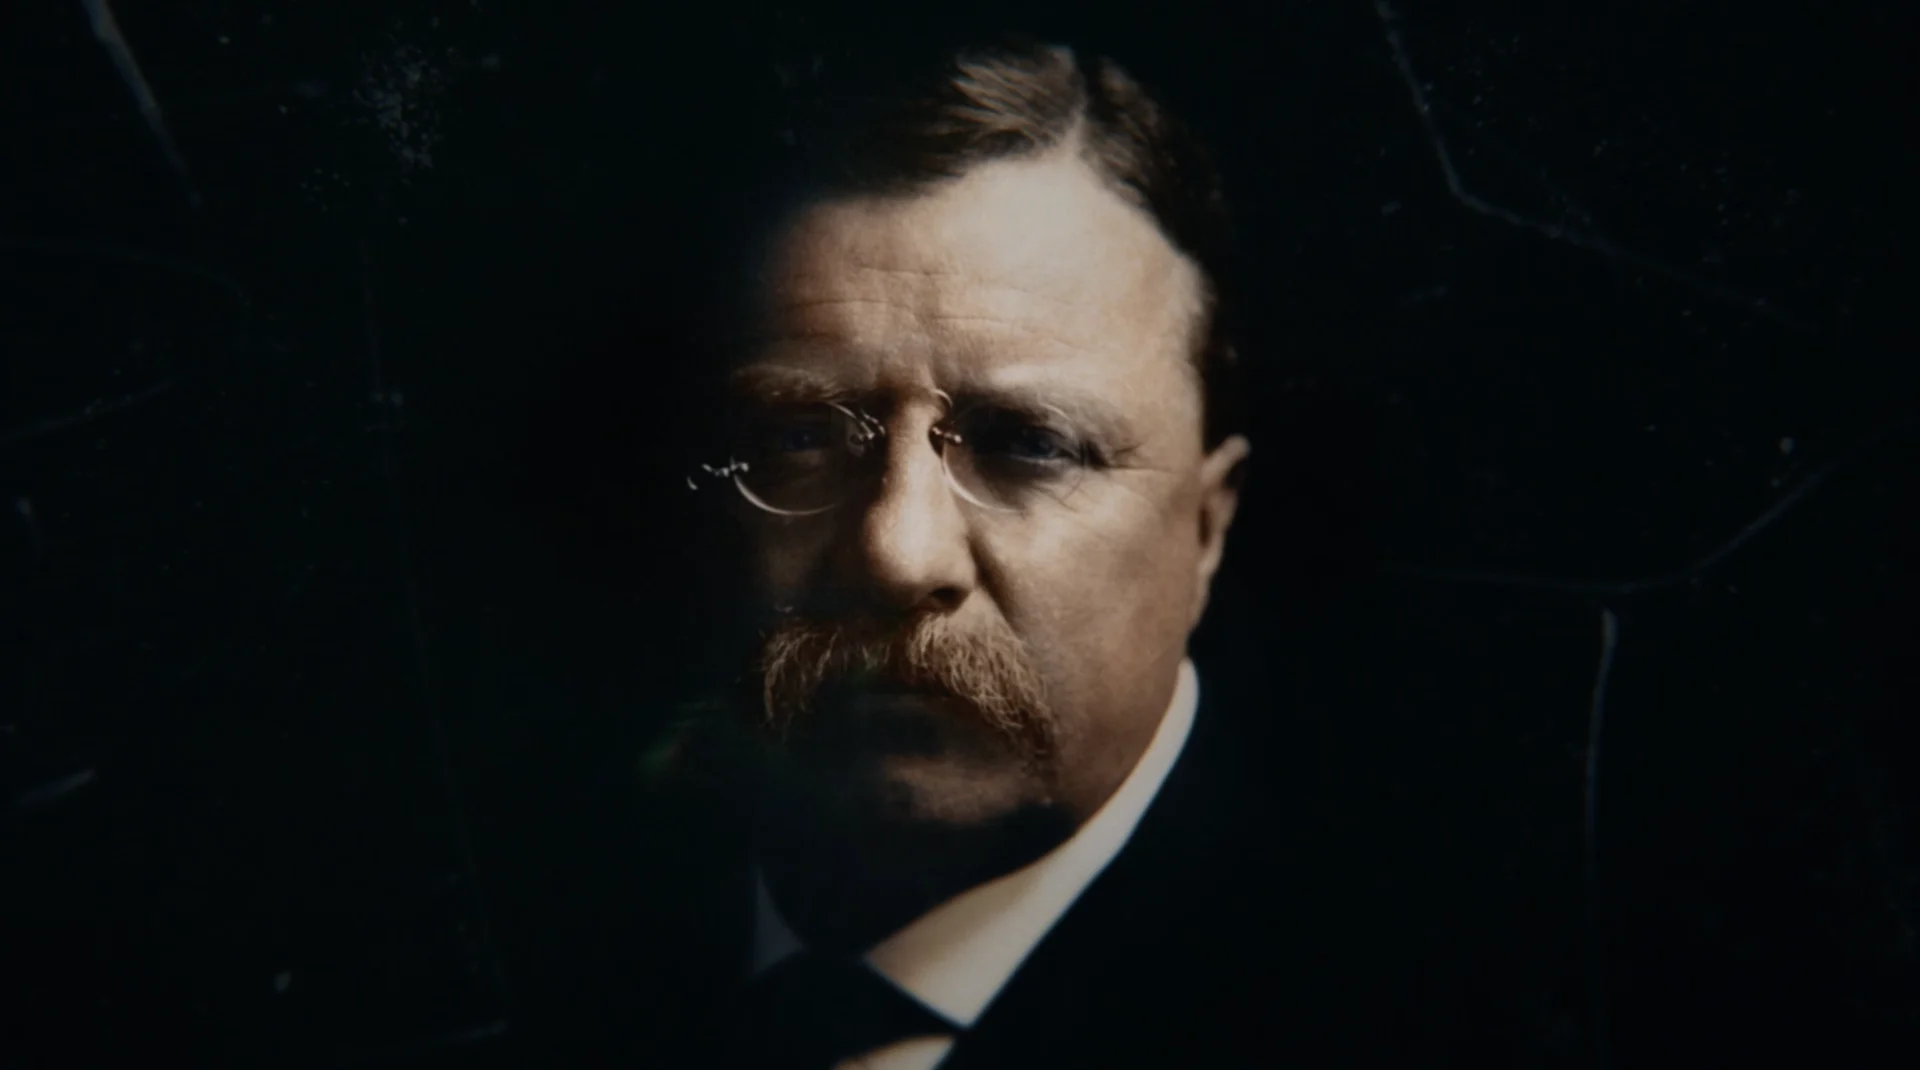 Theodore Roosevelt: A champion of social justice, a passionate conservationist, and the self-proclaimed “bull moose.” For History’s five-hour television event Theodore Roosevelt, we designed maps, treated photos, and more to characterize and chronicle a panoramic portrait of the first modern President of the United States.